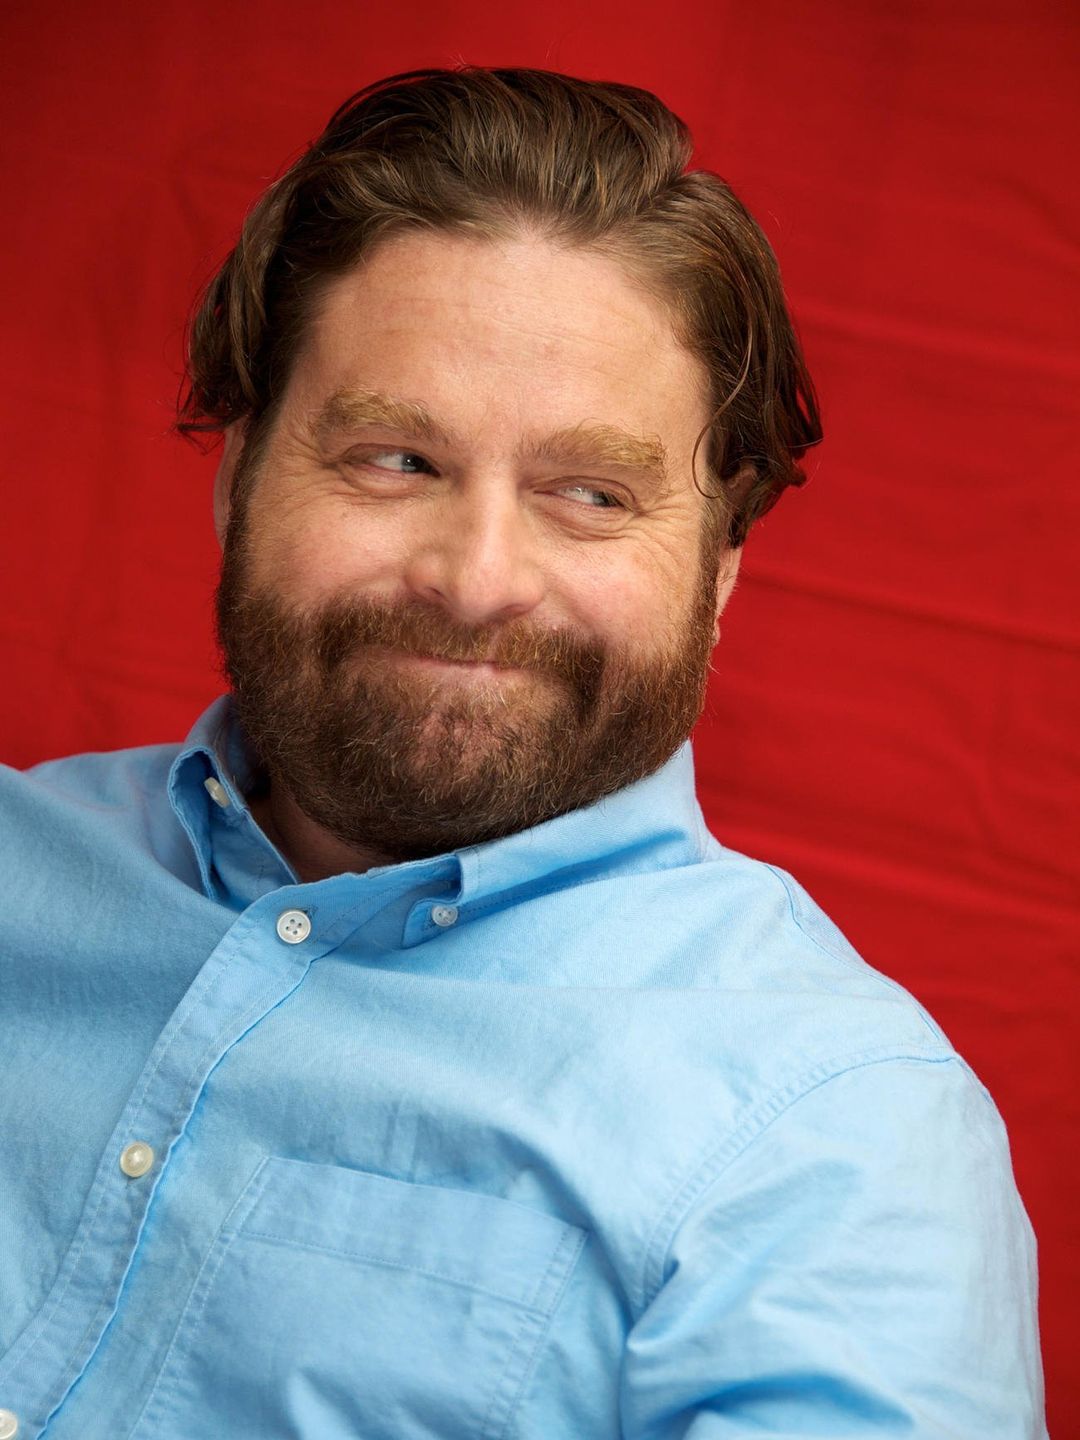 Zach Galifianakis who is his father